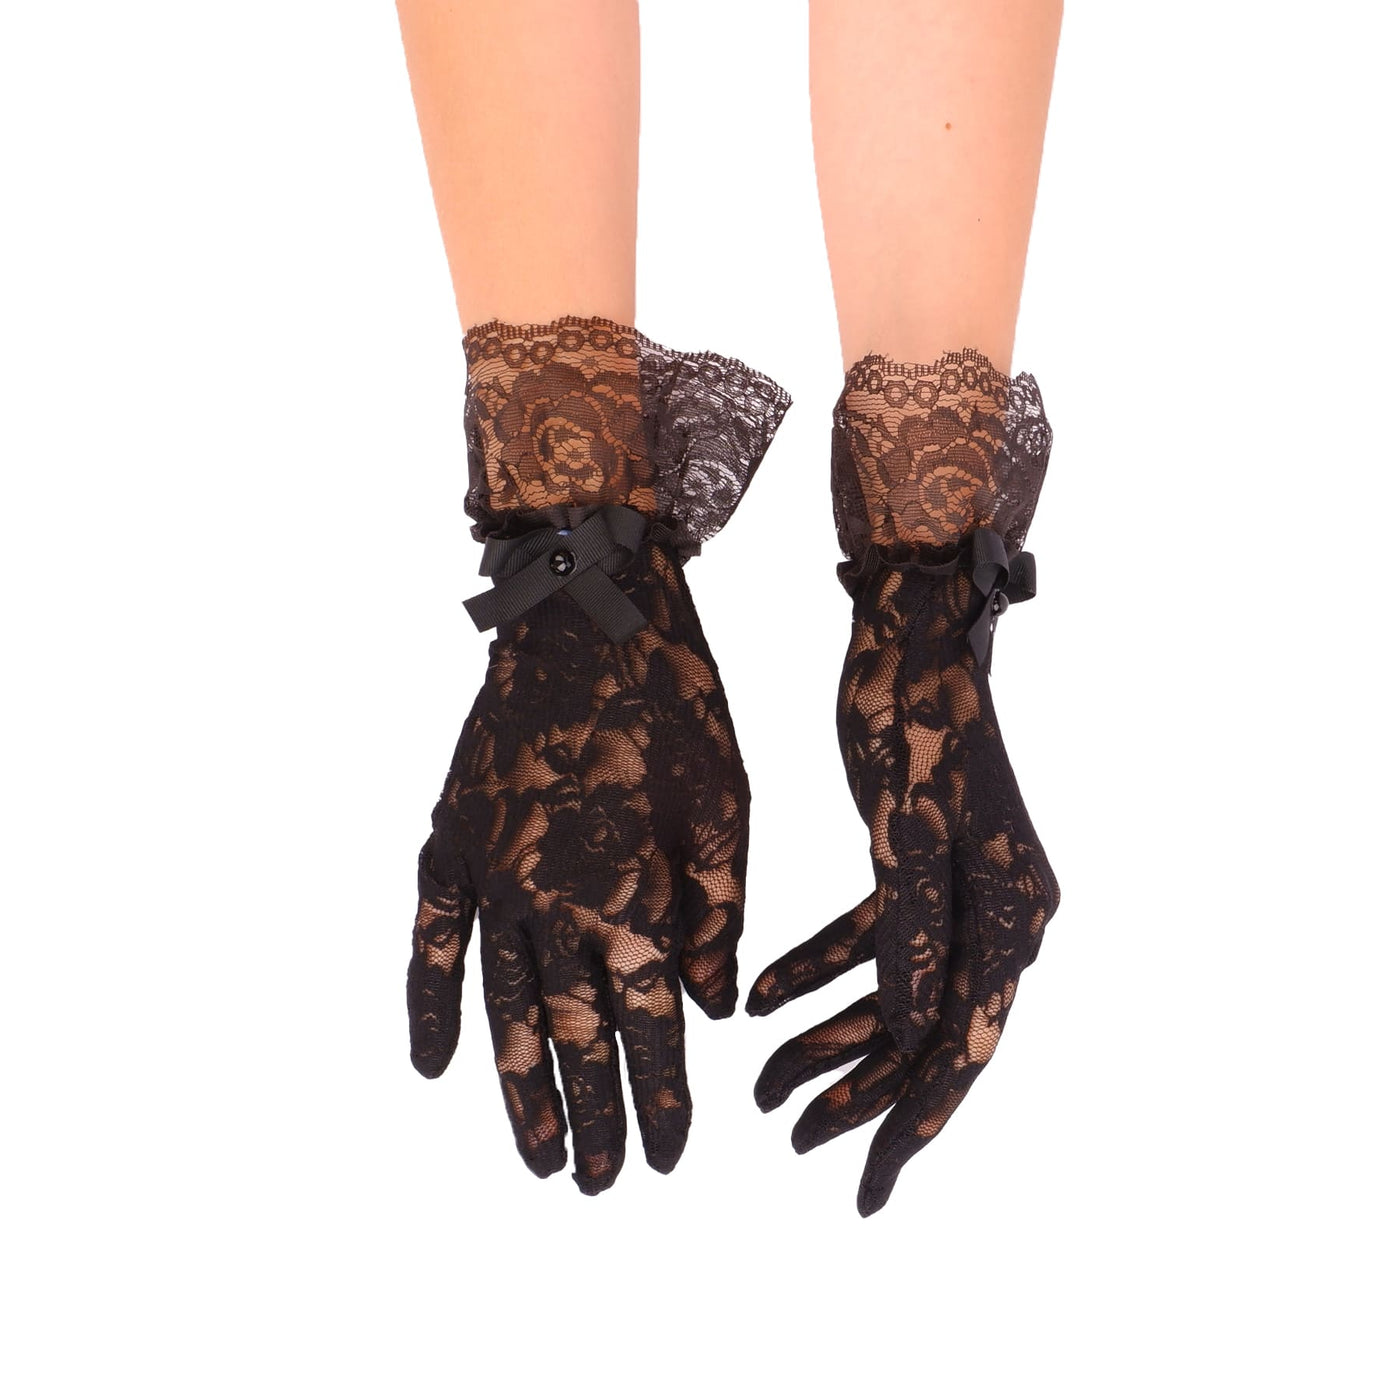 Wedding Gloves Made of Tulle Lace, Bridal Henna Night Gloves with Ribbon, Special Gloves for Costumes